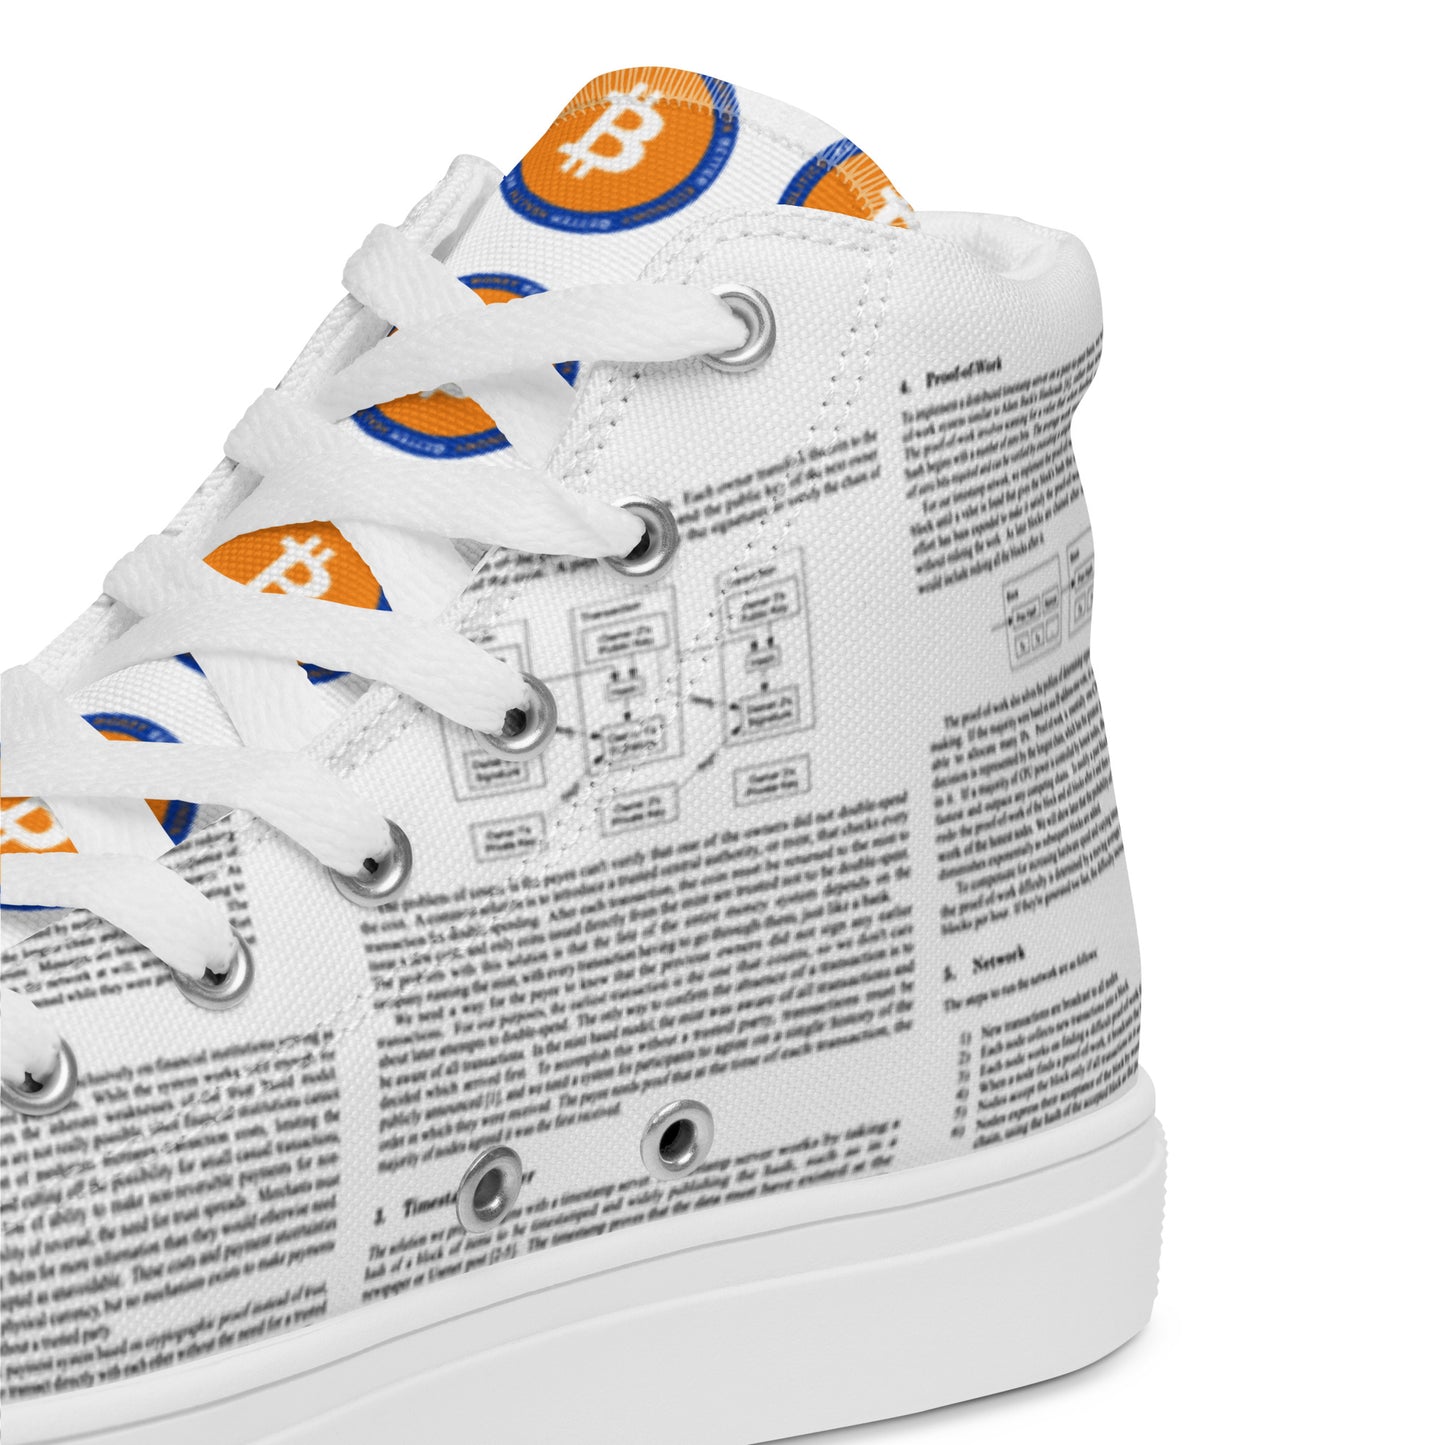 Whitepaper Shoes